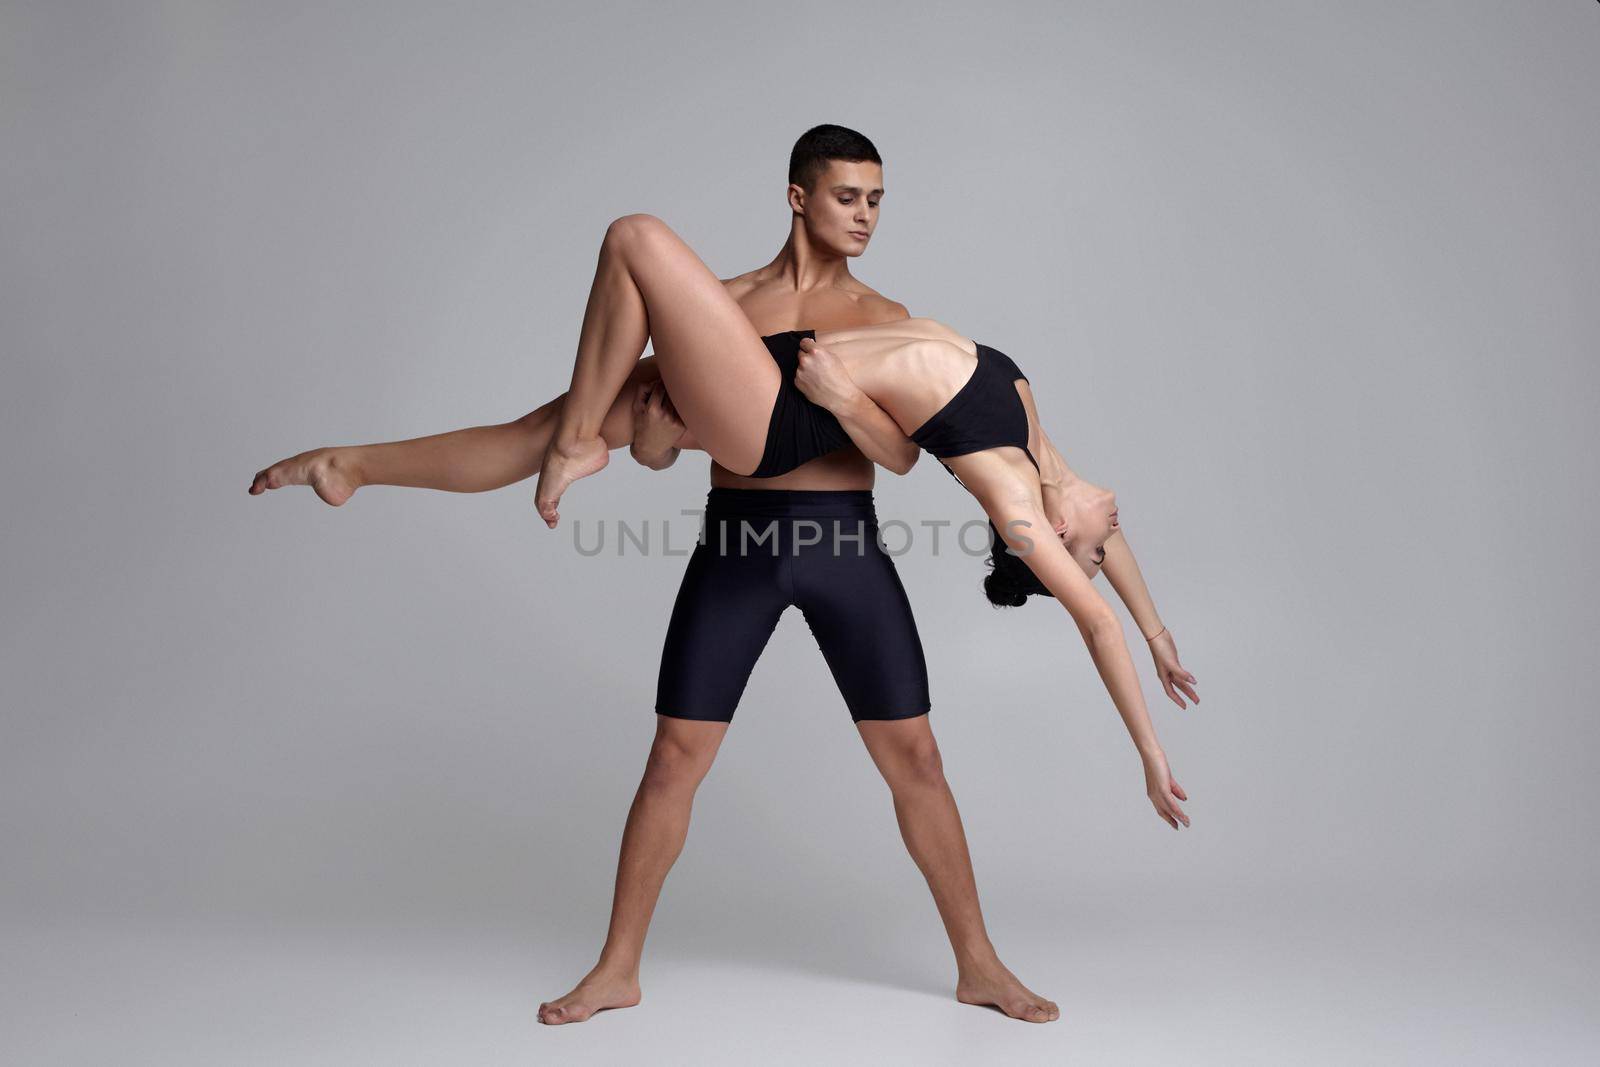 Two graceful ballet dancers in black suits are posing over a gray studio background. Handsome guy in black shorts is holding a beautiful woman in a black swimwear. Ballet and contemporary choreography concept. Art photo.